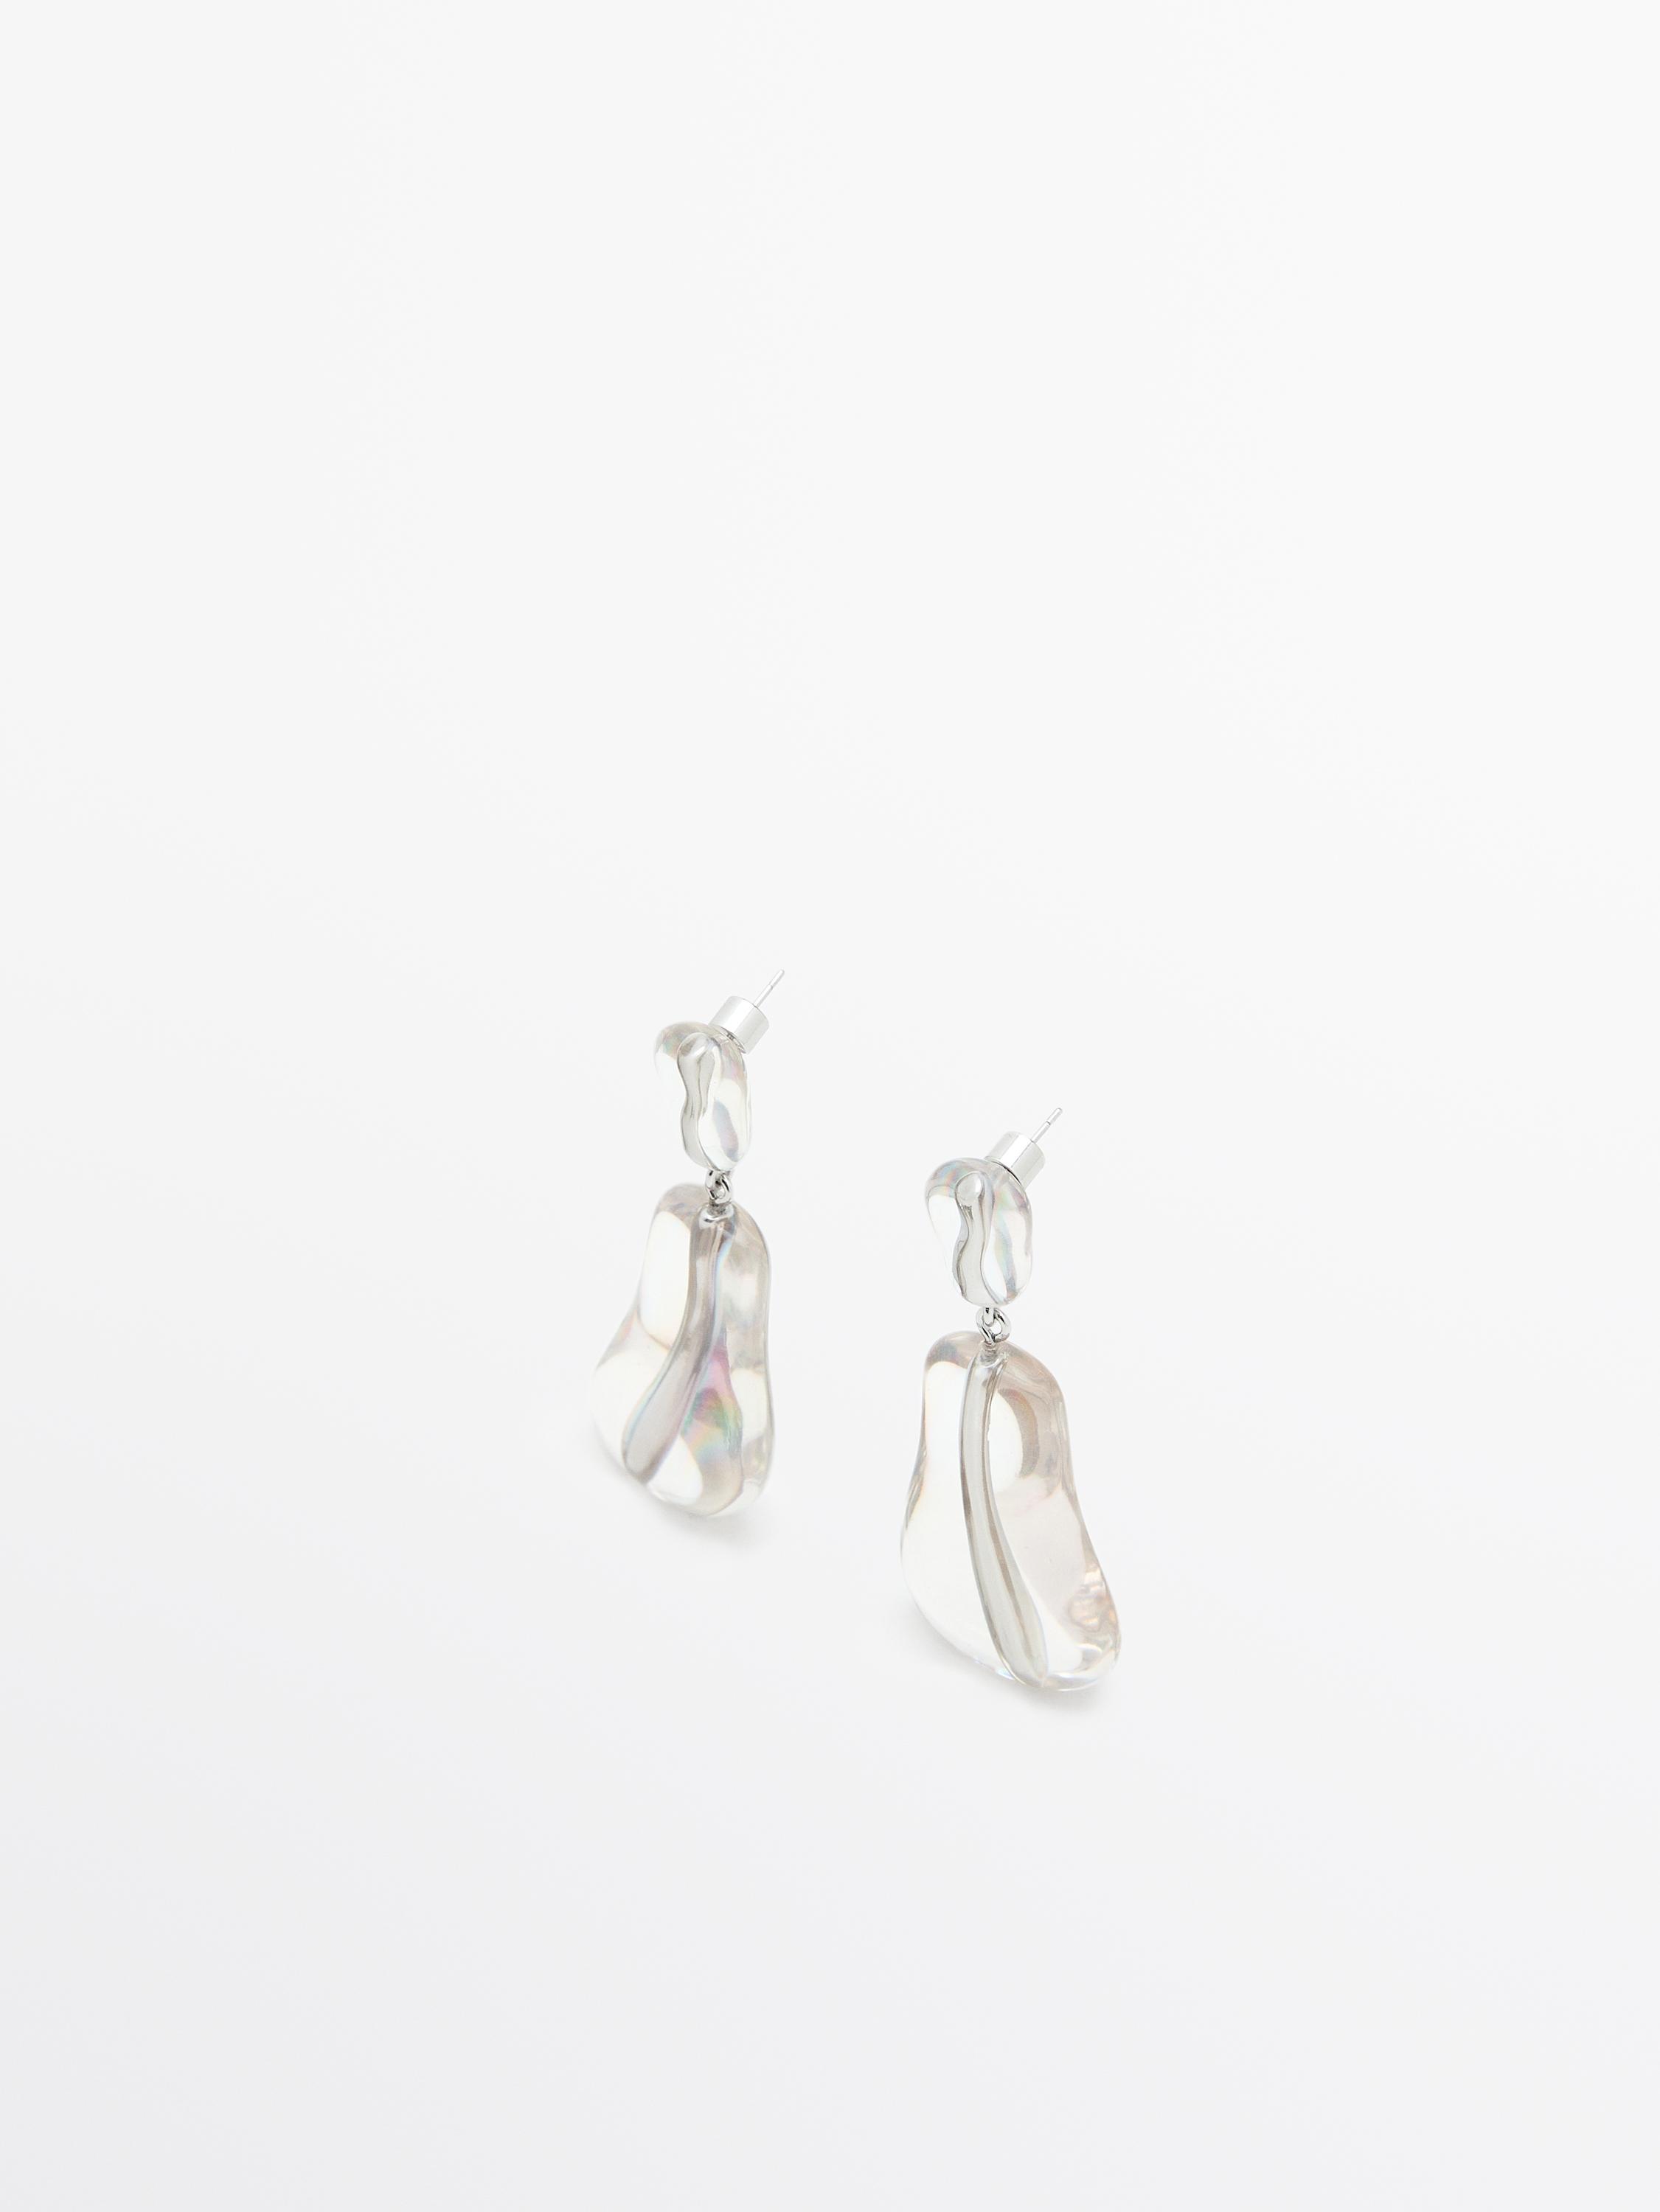 Earrings with piece detail - Limited Edition